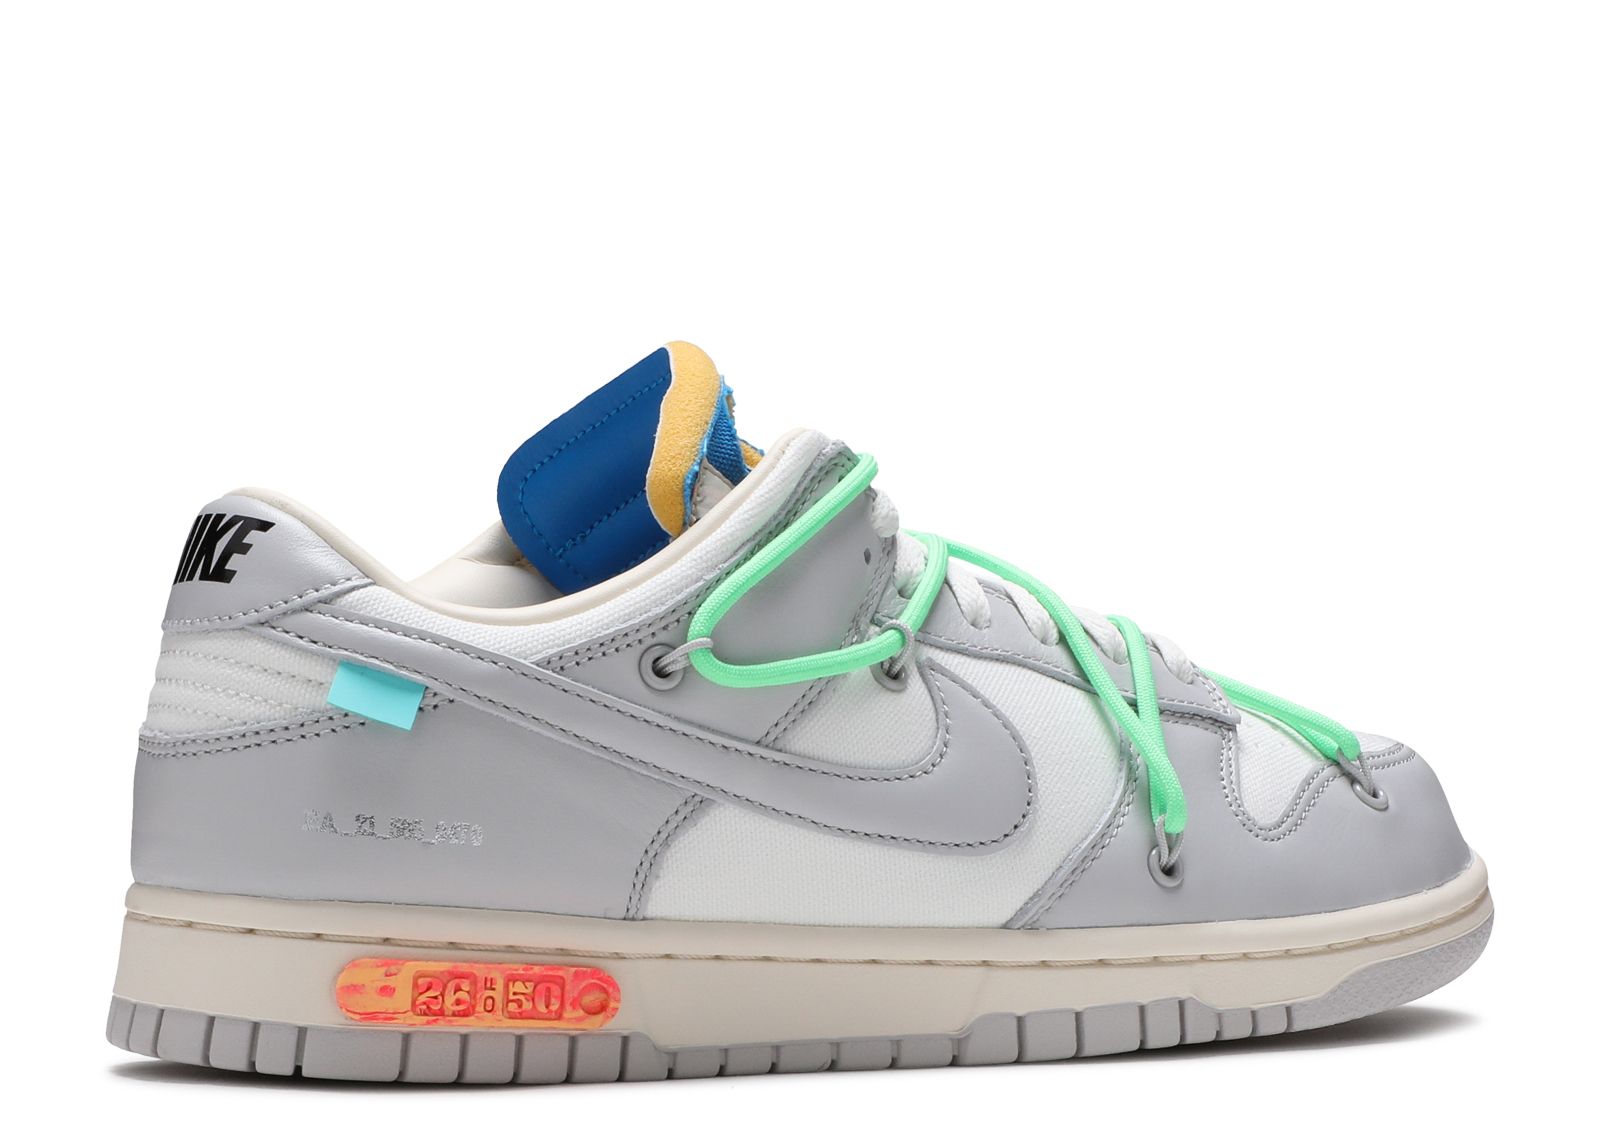 Off White X Dunk Low 'Lot 26 Of 50' - Nike - DM1602 116 - sail 